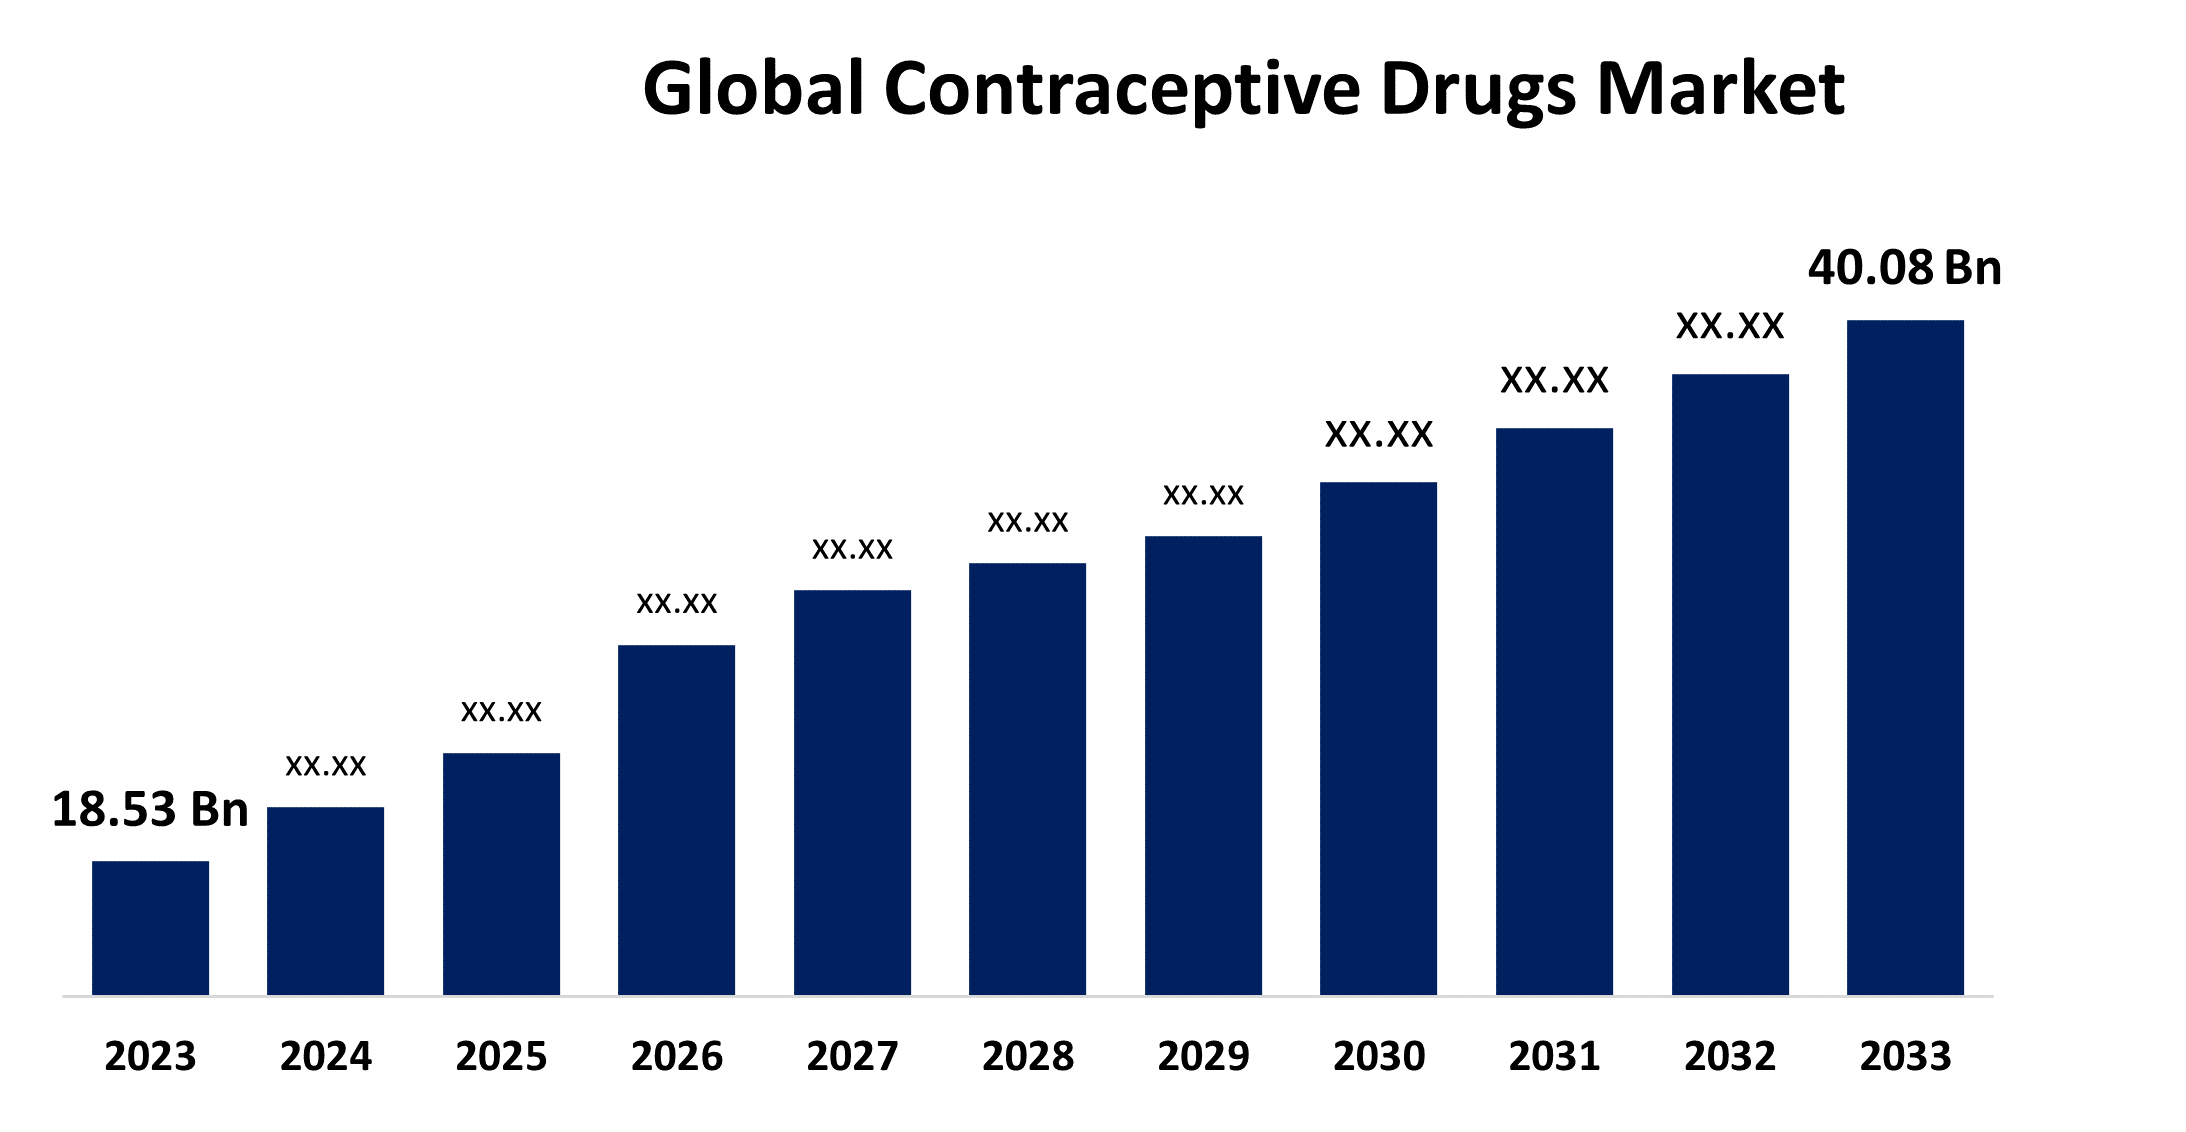 Global Contraceptive Drugs Market 